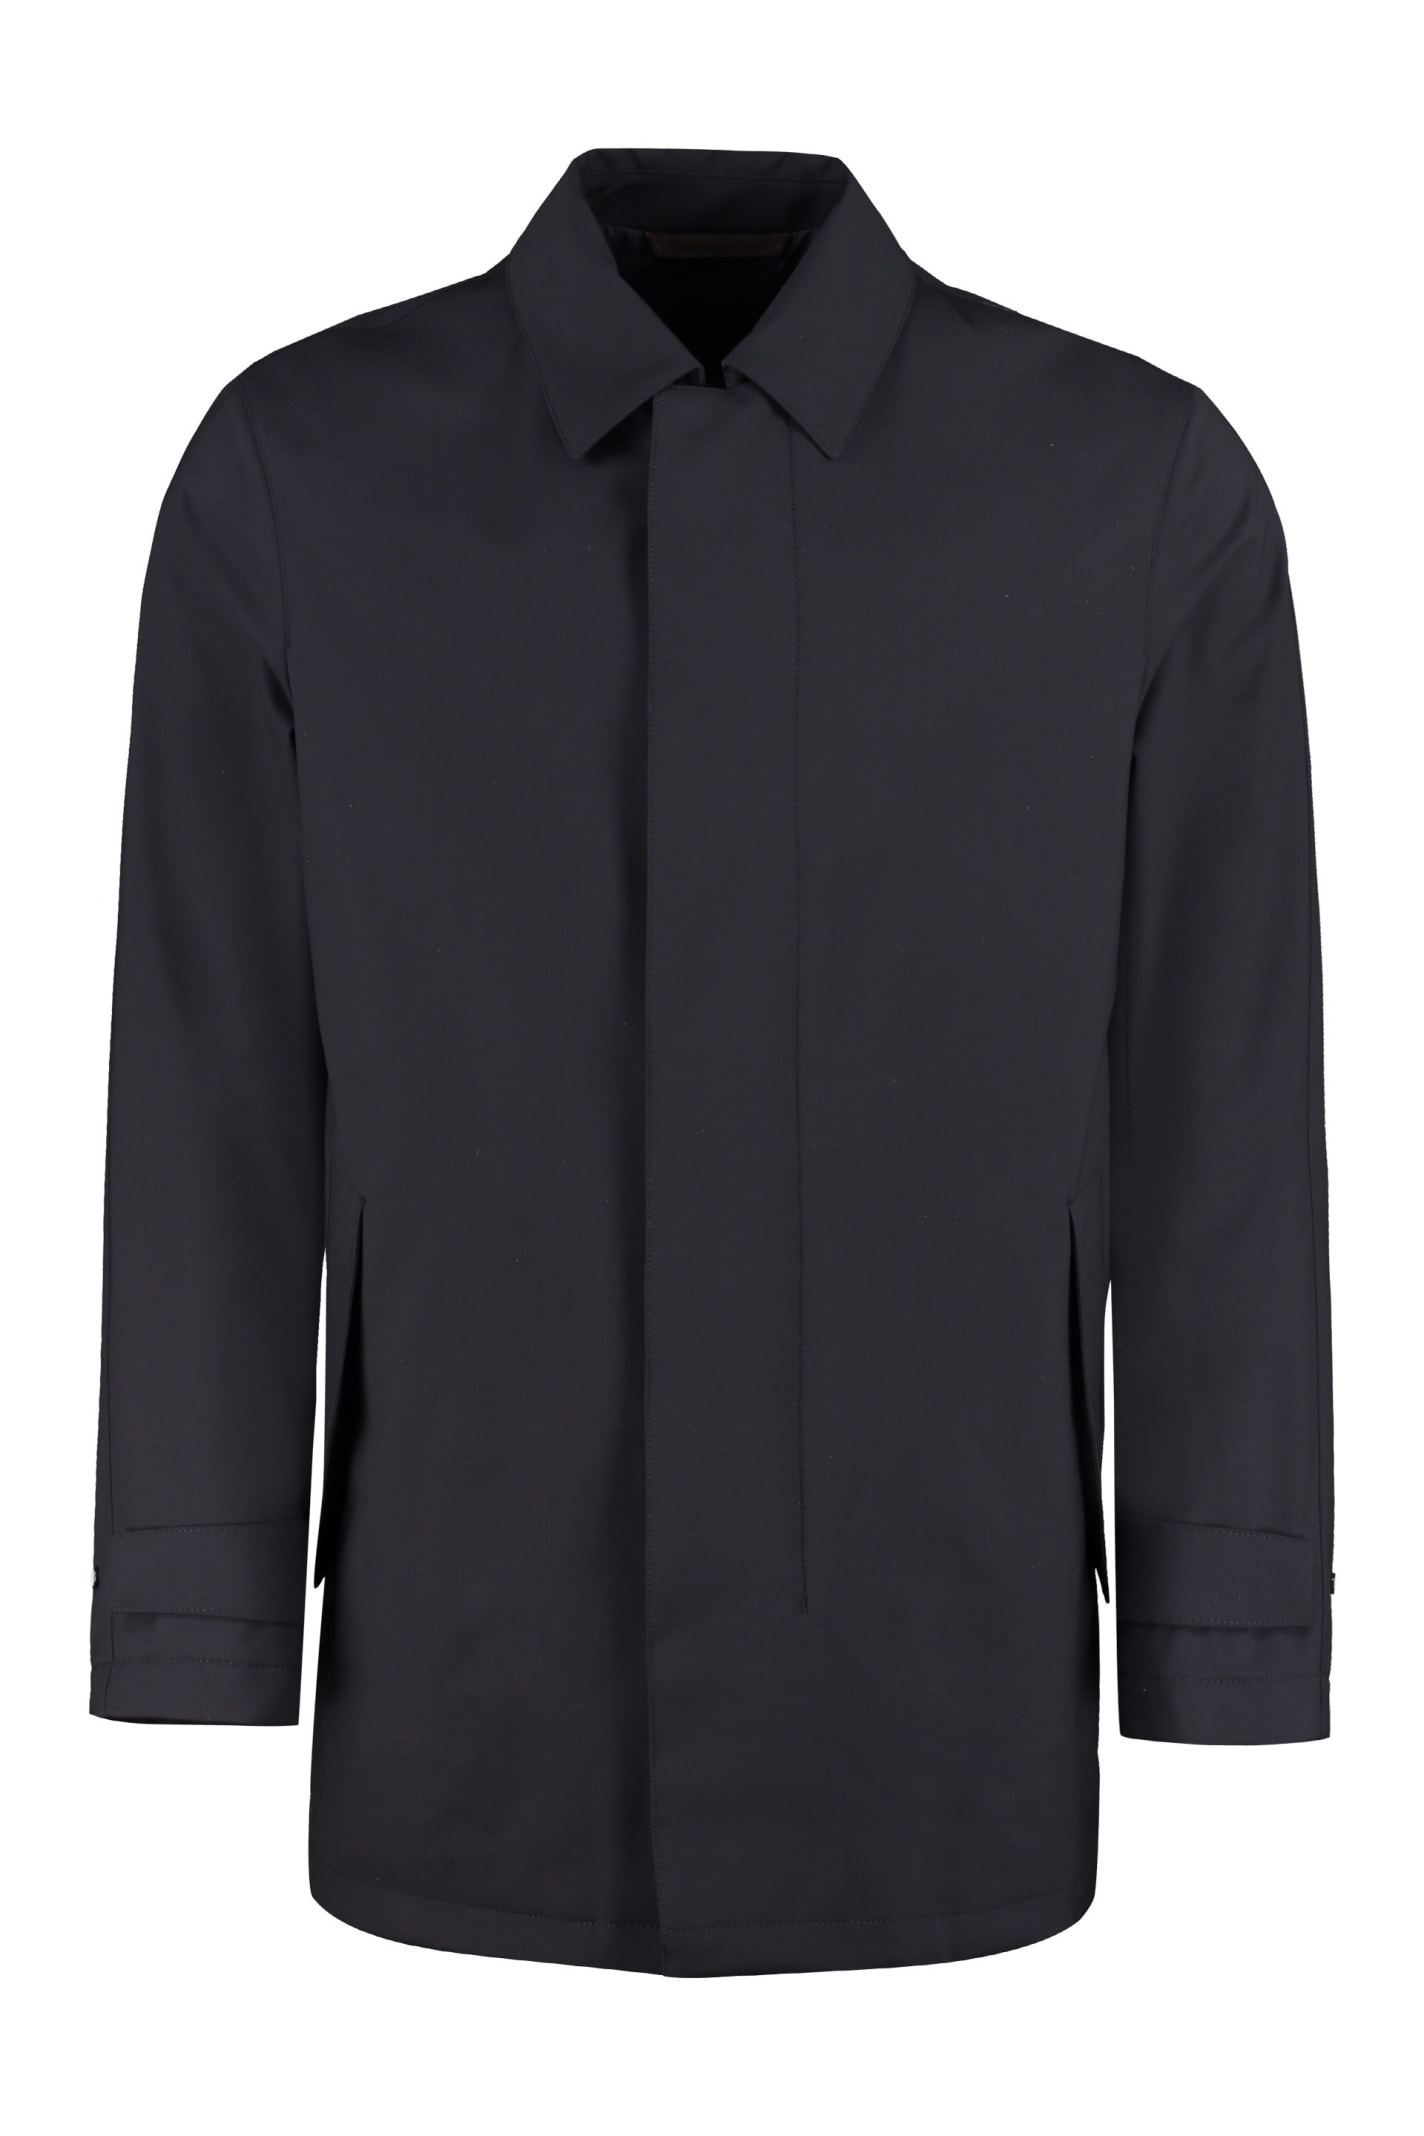 Z Zegna Jacket With Zip And Button Fastening In Blue | ModeSens